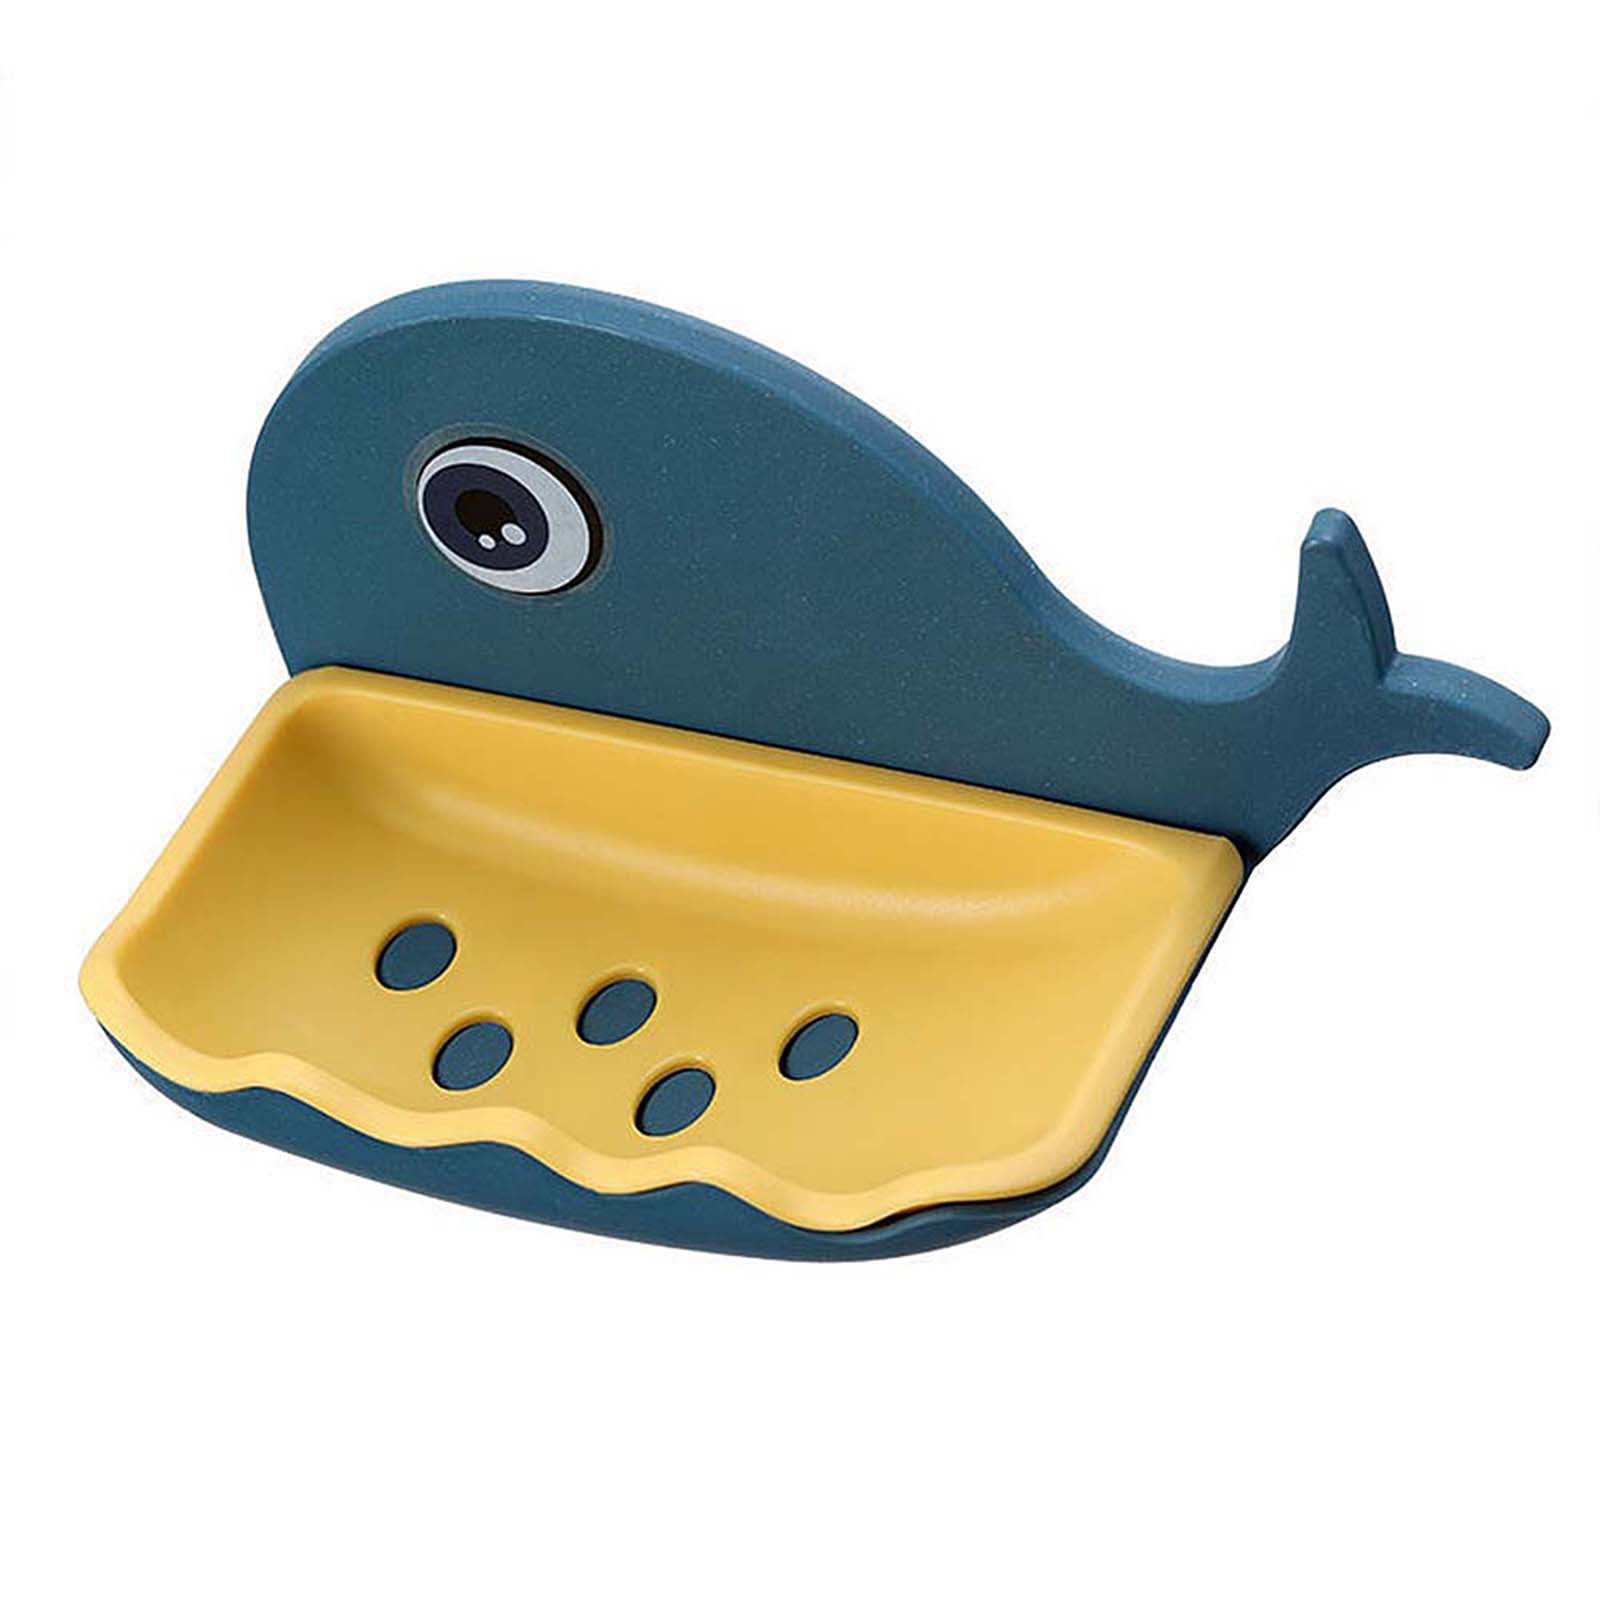 Whale Soap Dish Holder Box Bathroom Shower Water Draining Plate Tray Home Decor